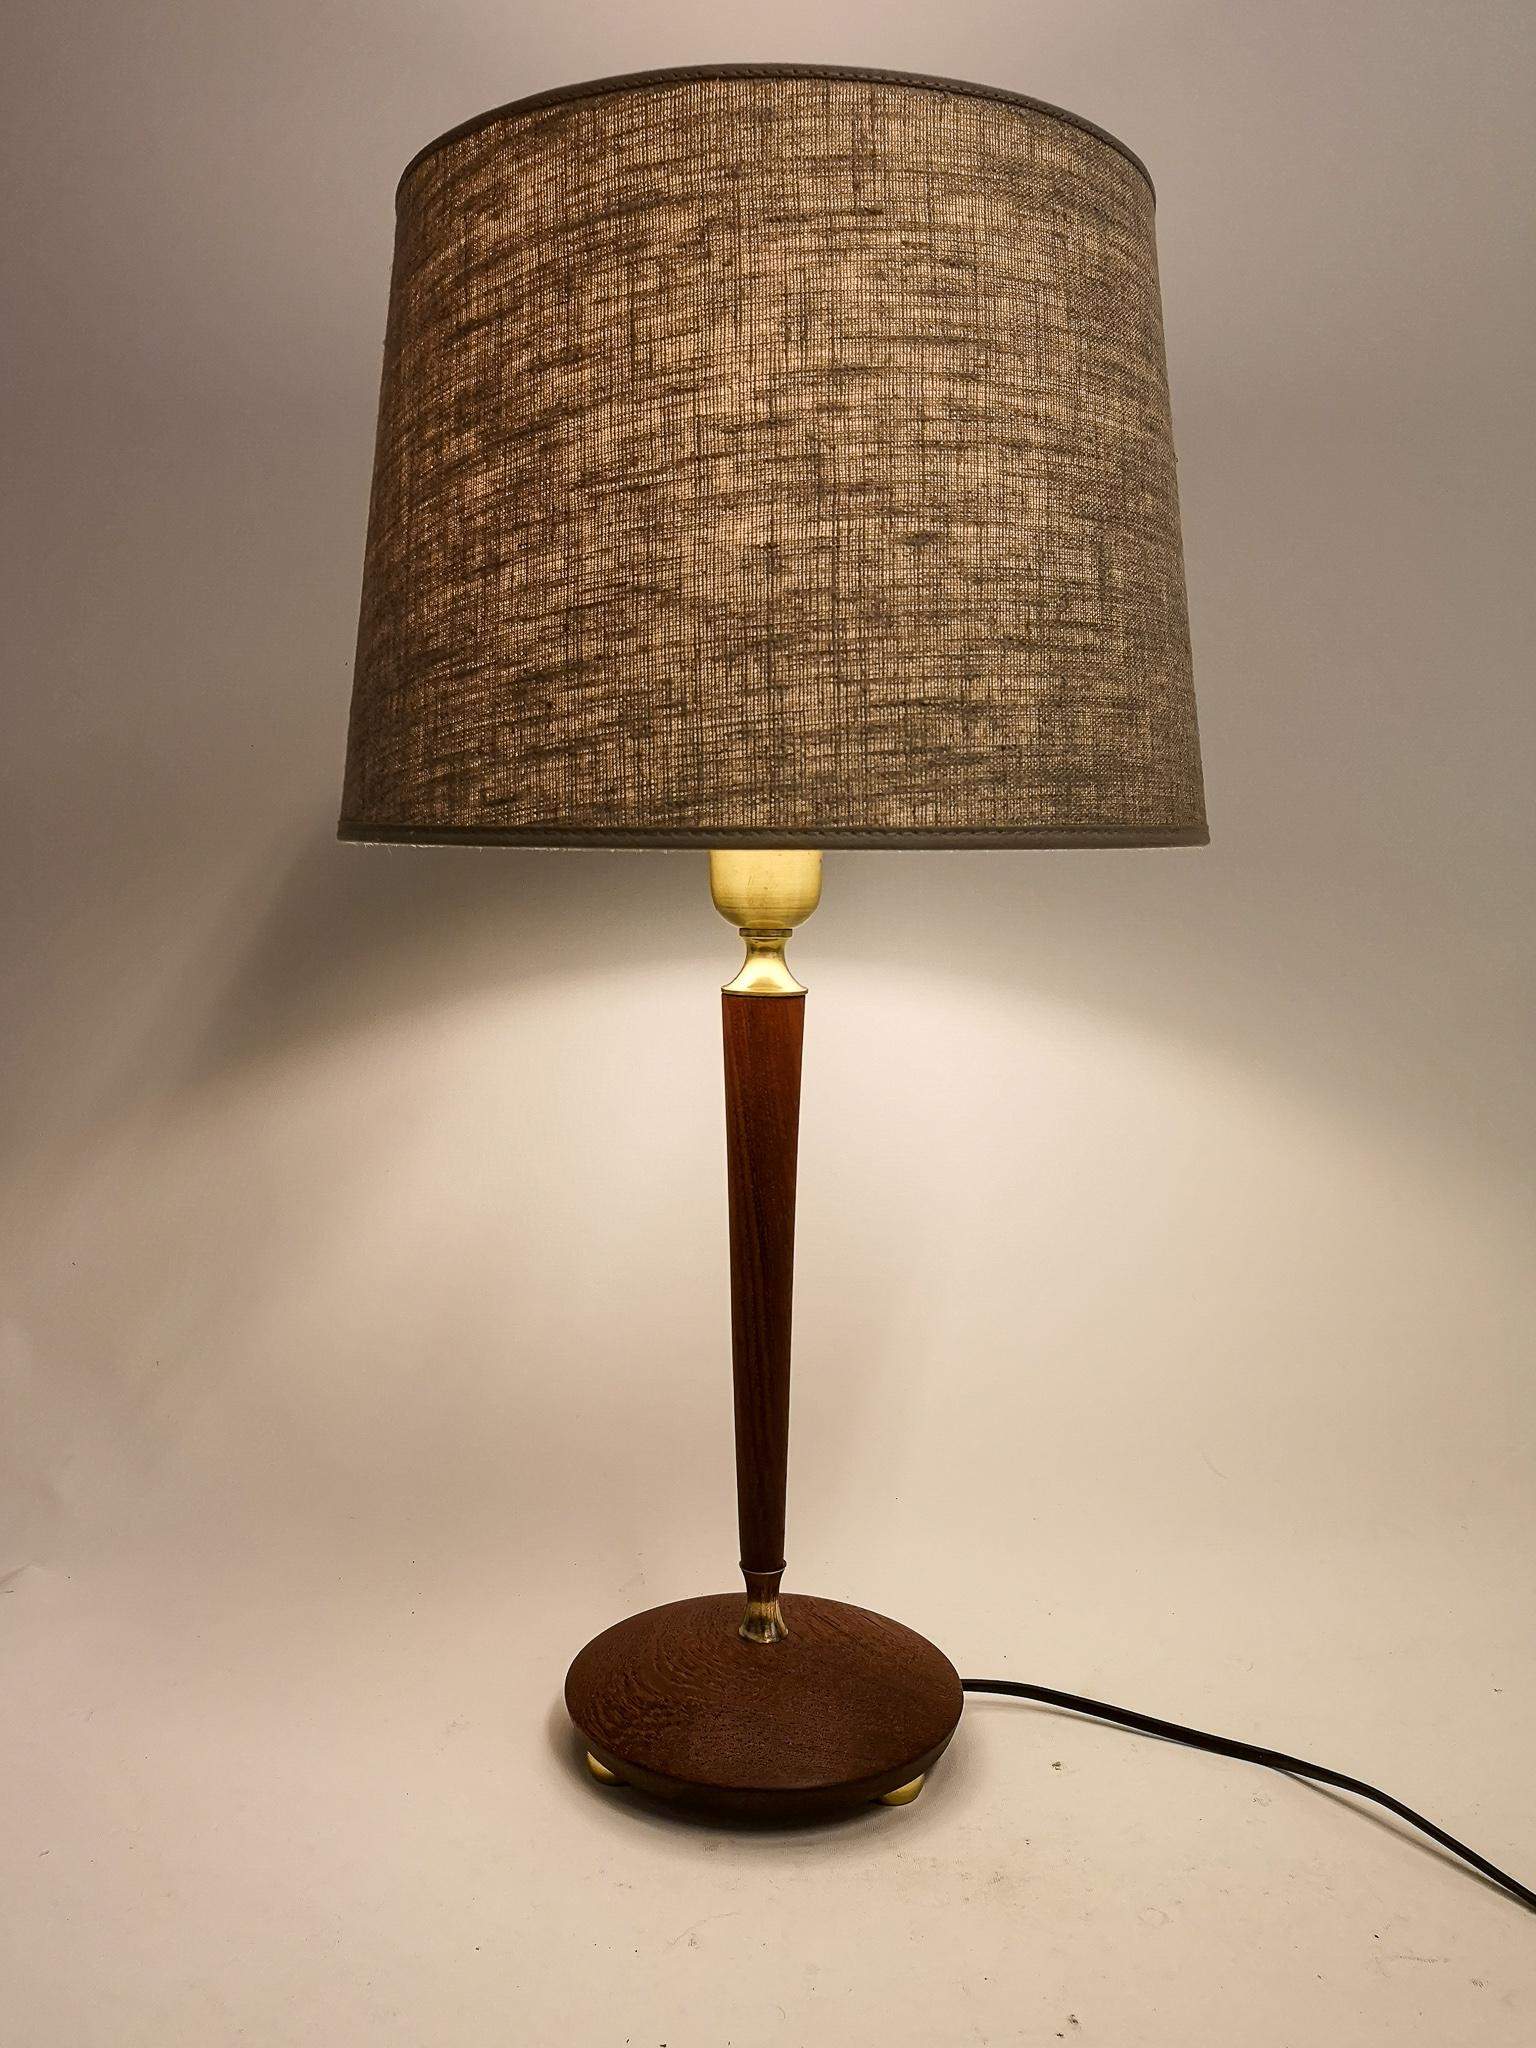 Wonderful sculptured table lamp produced in Sweden at Gothenburgs Armaturhandverk. Details in teak and brass makes this table lamp a nice addition to the office or side table / sideboard. 

Good vintage condition, new wiring. 

Measures H 56